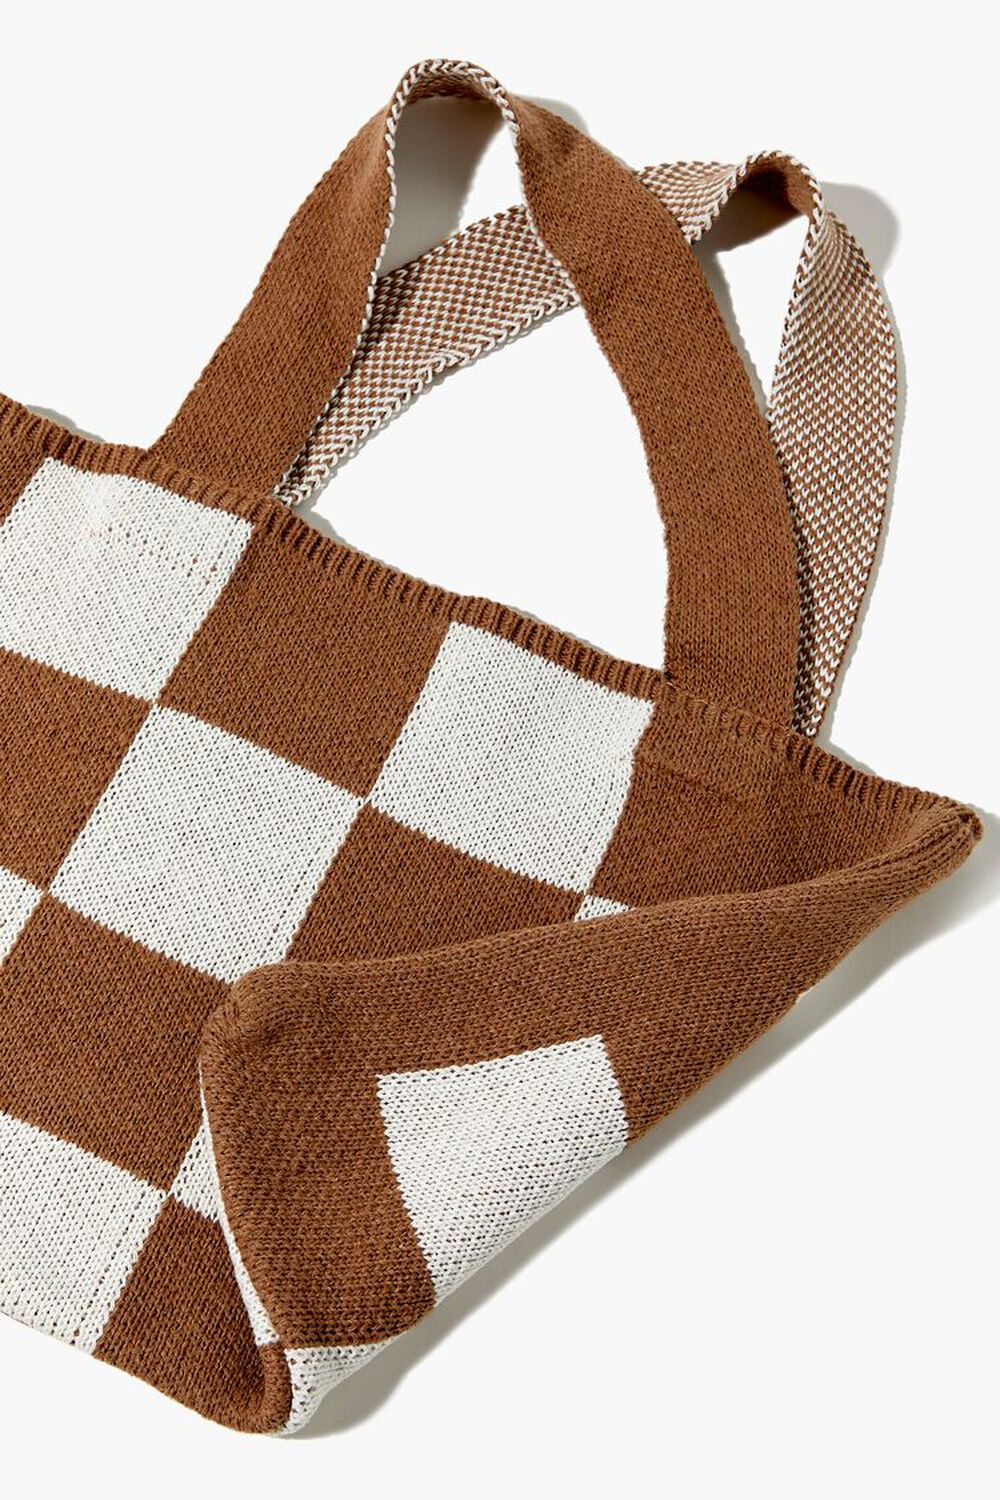 Checkered Knitted Tote Bag